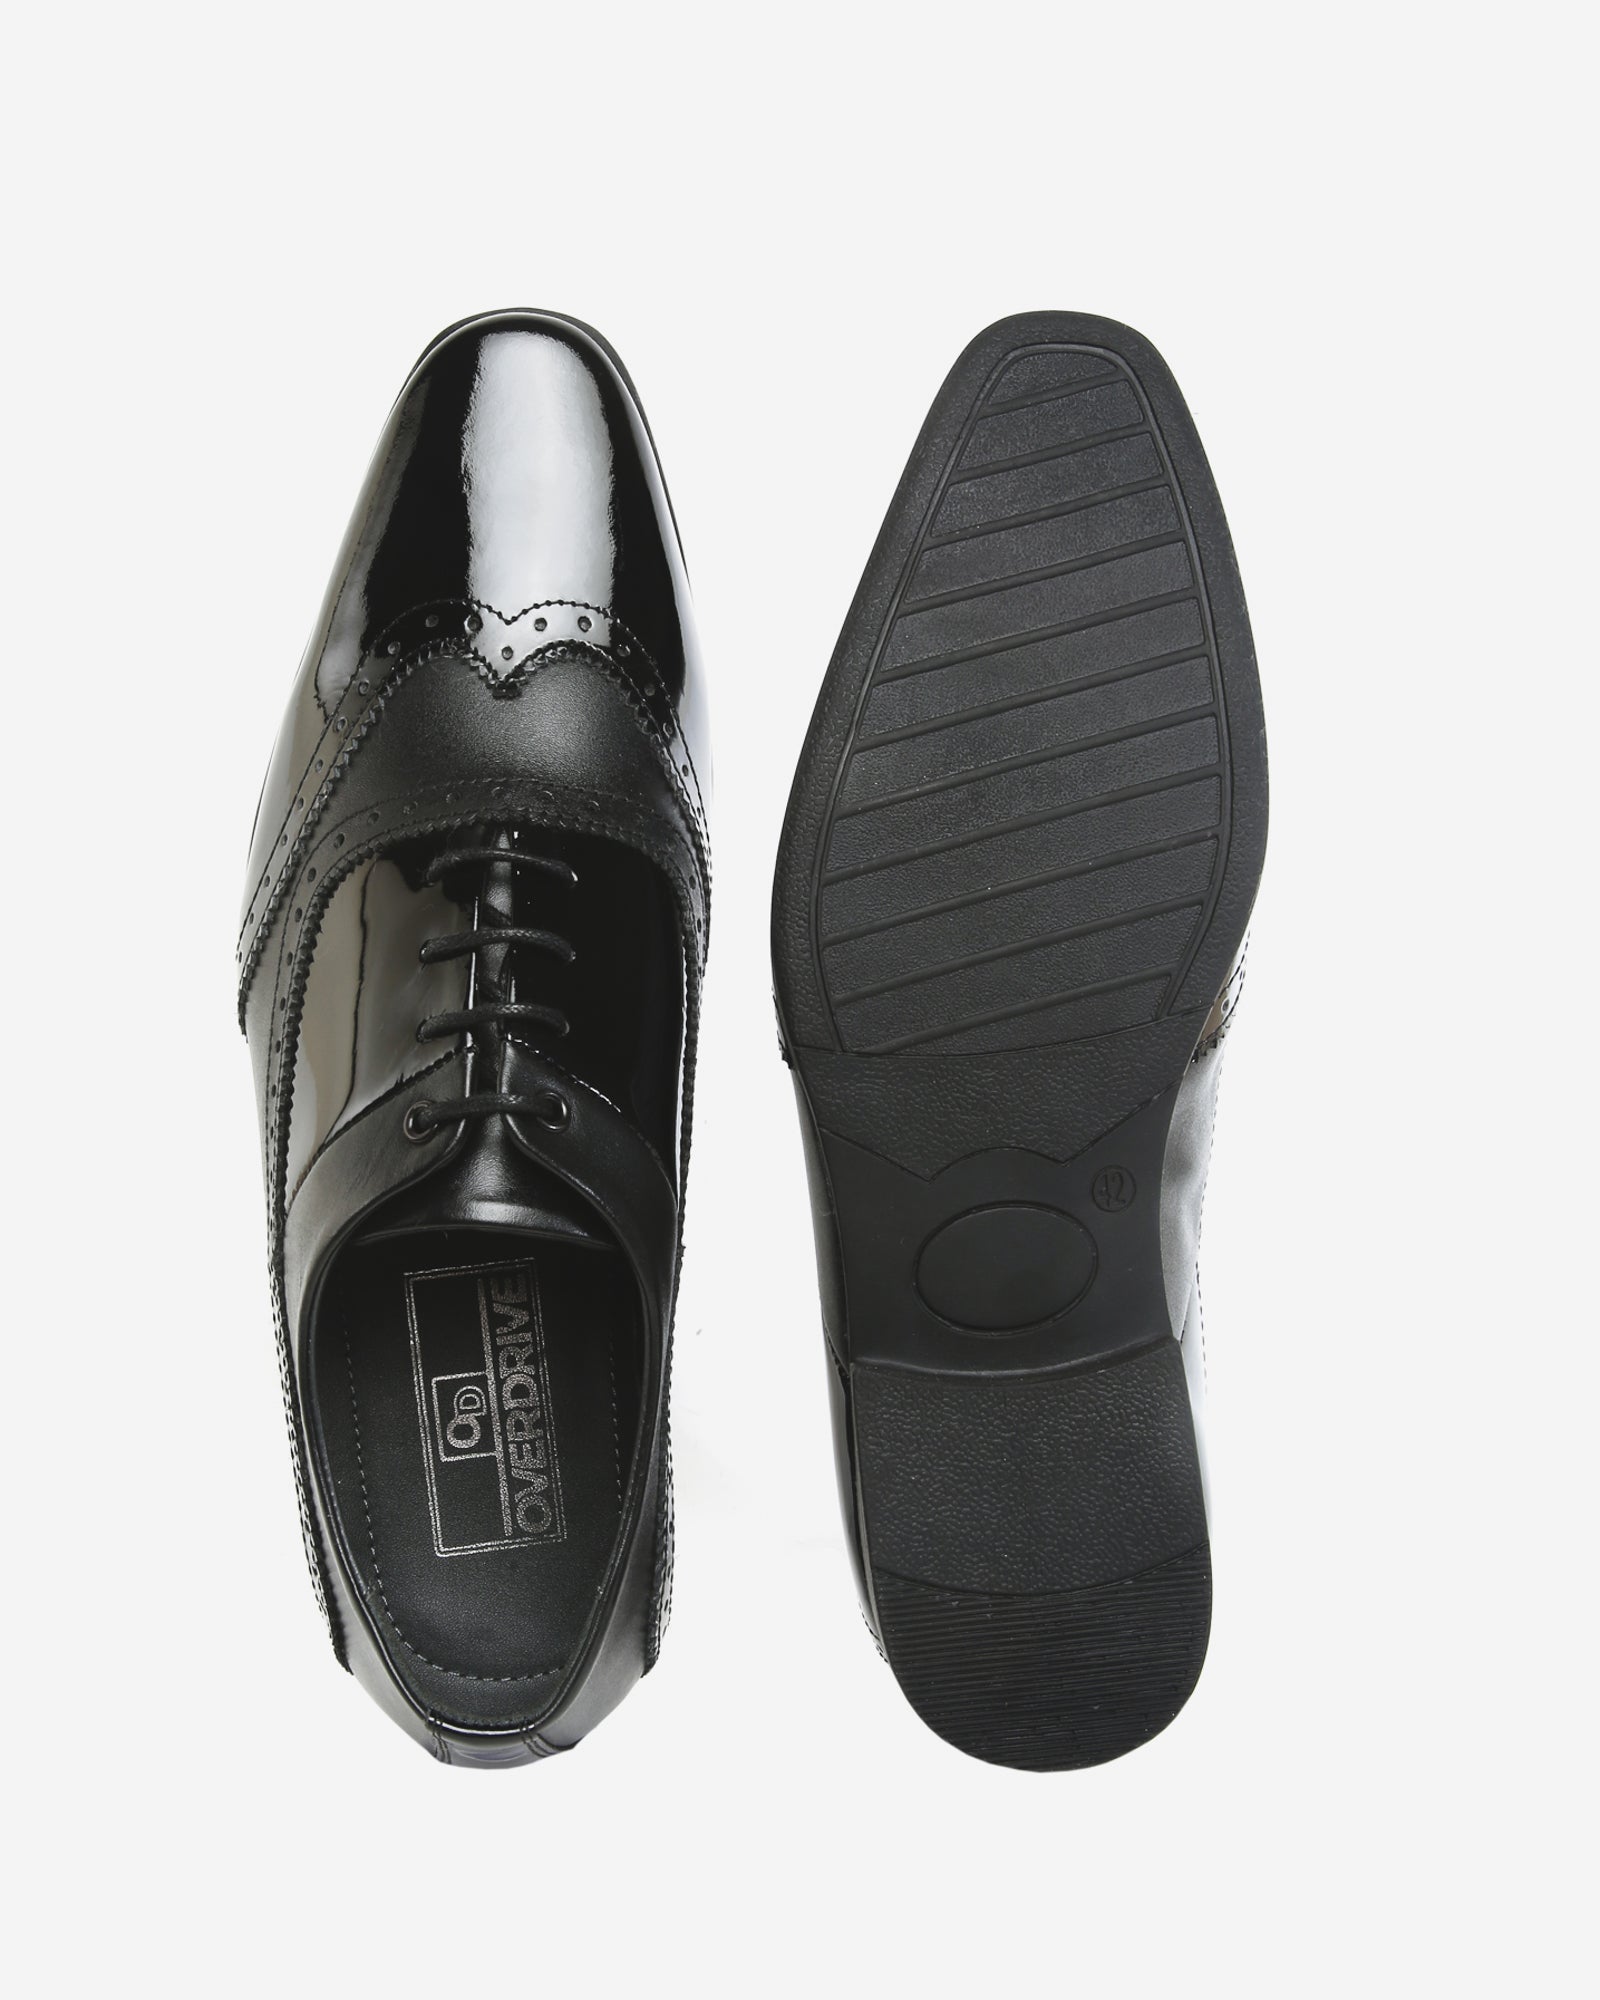 Shine On with Lace Up Black Patent Shoe